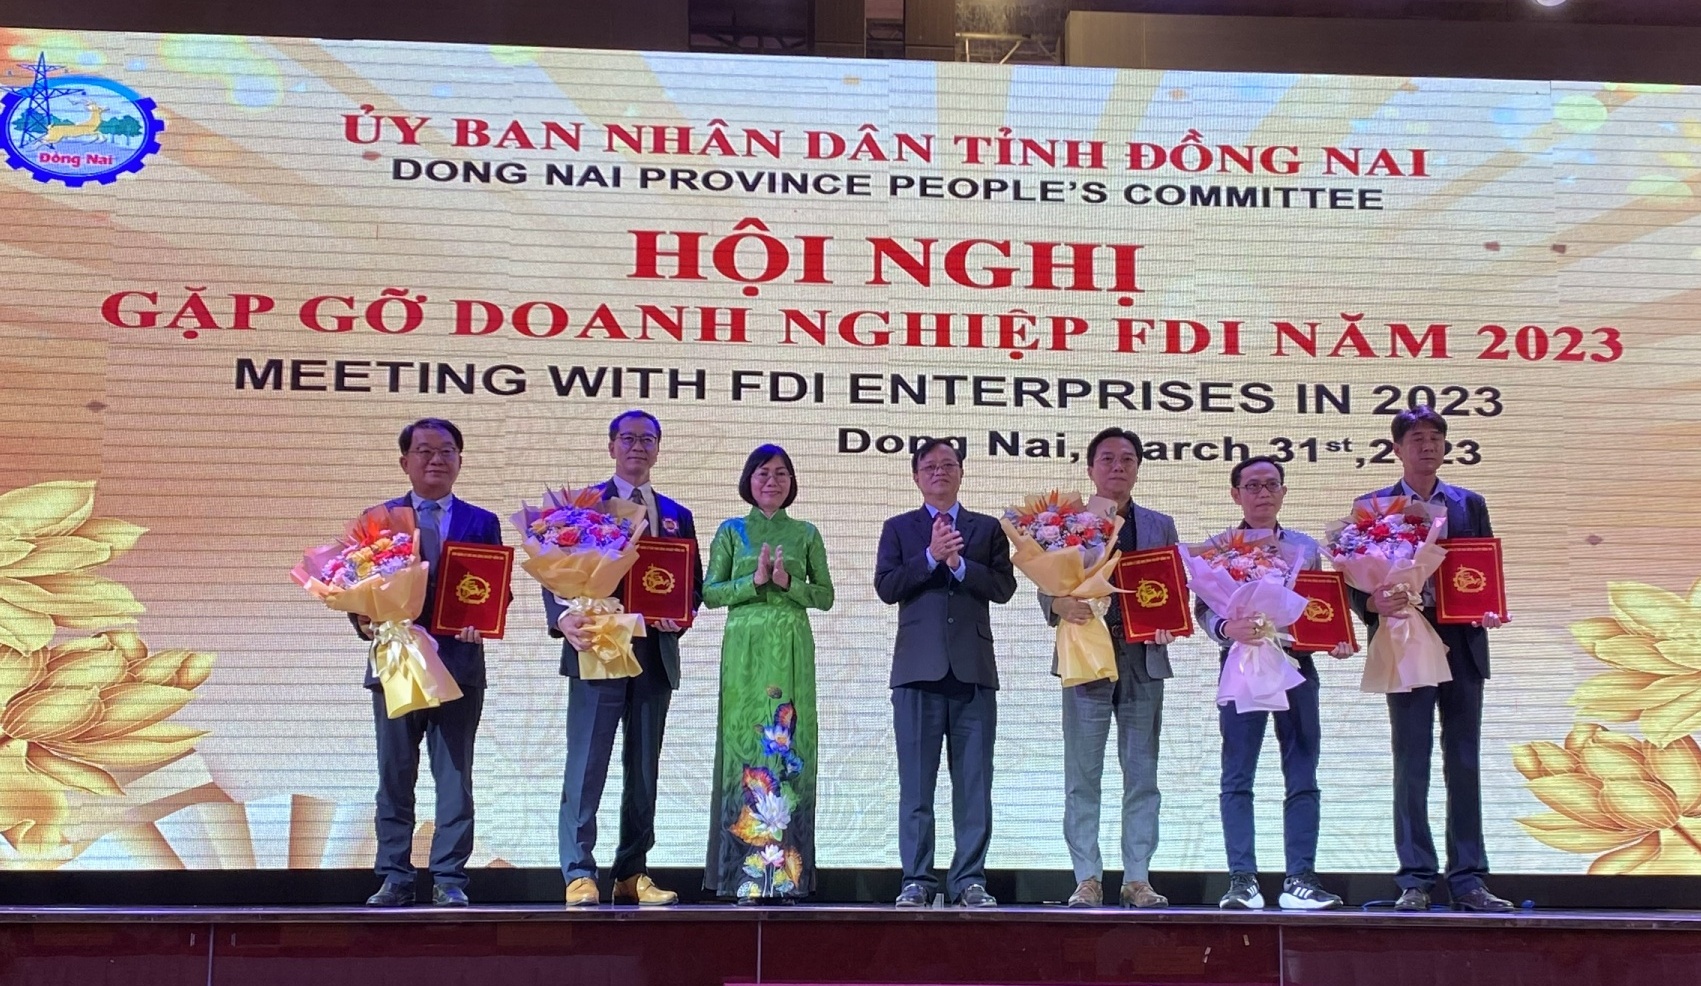 More than $370 million of FDI poured into Dong Nai province